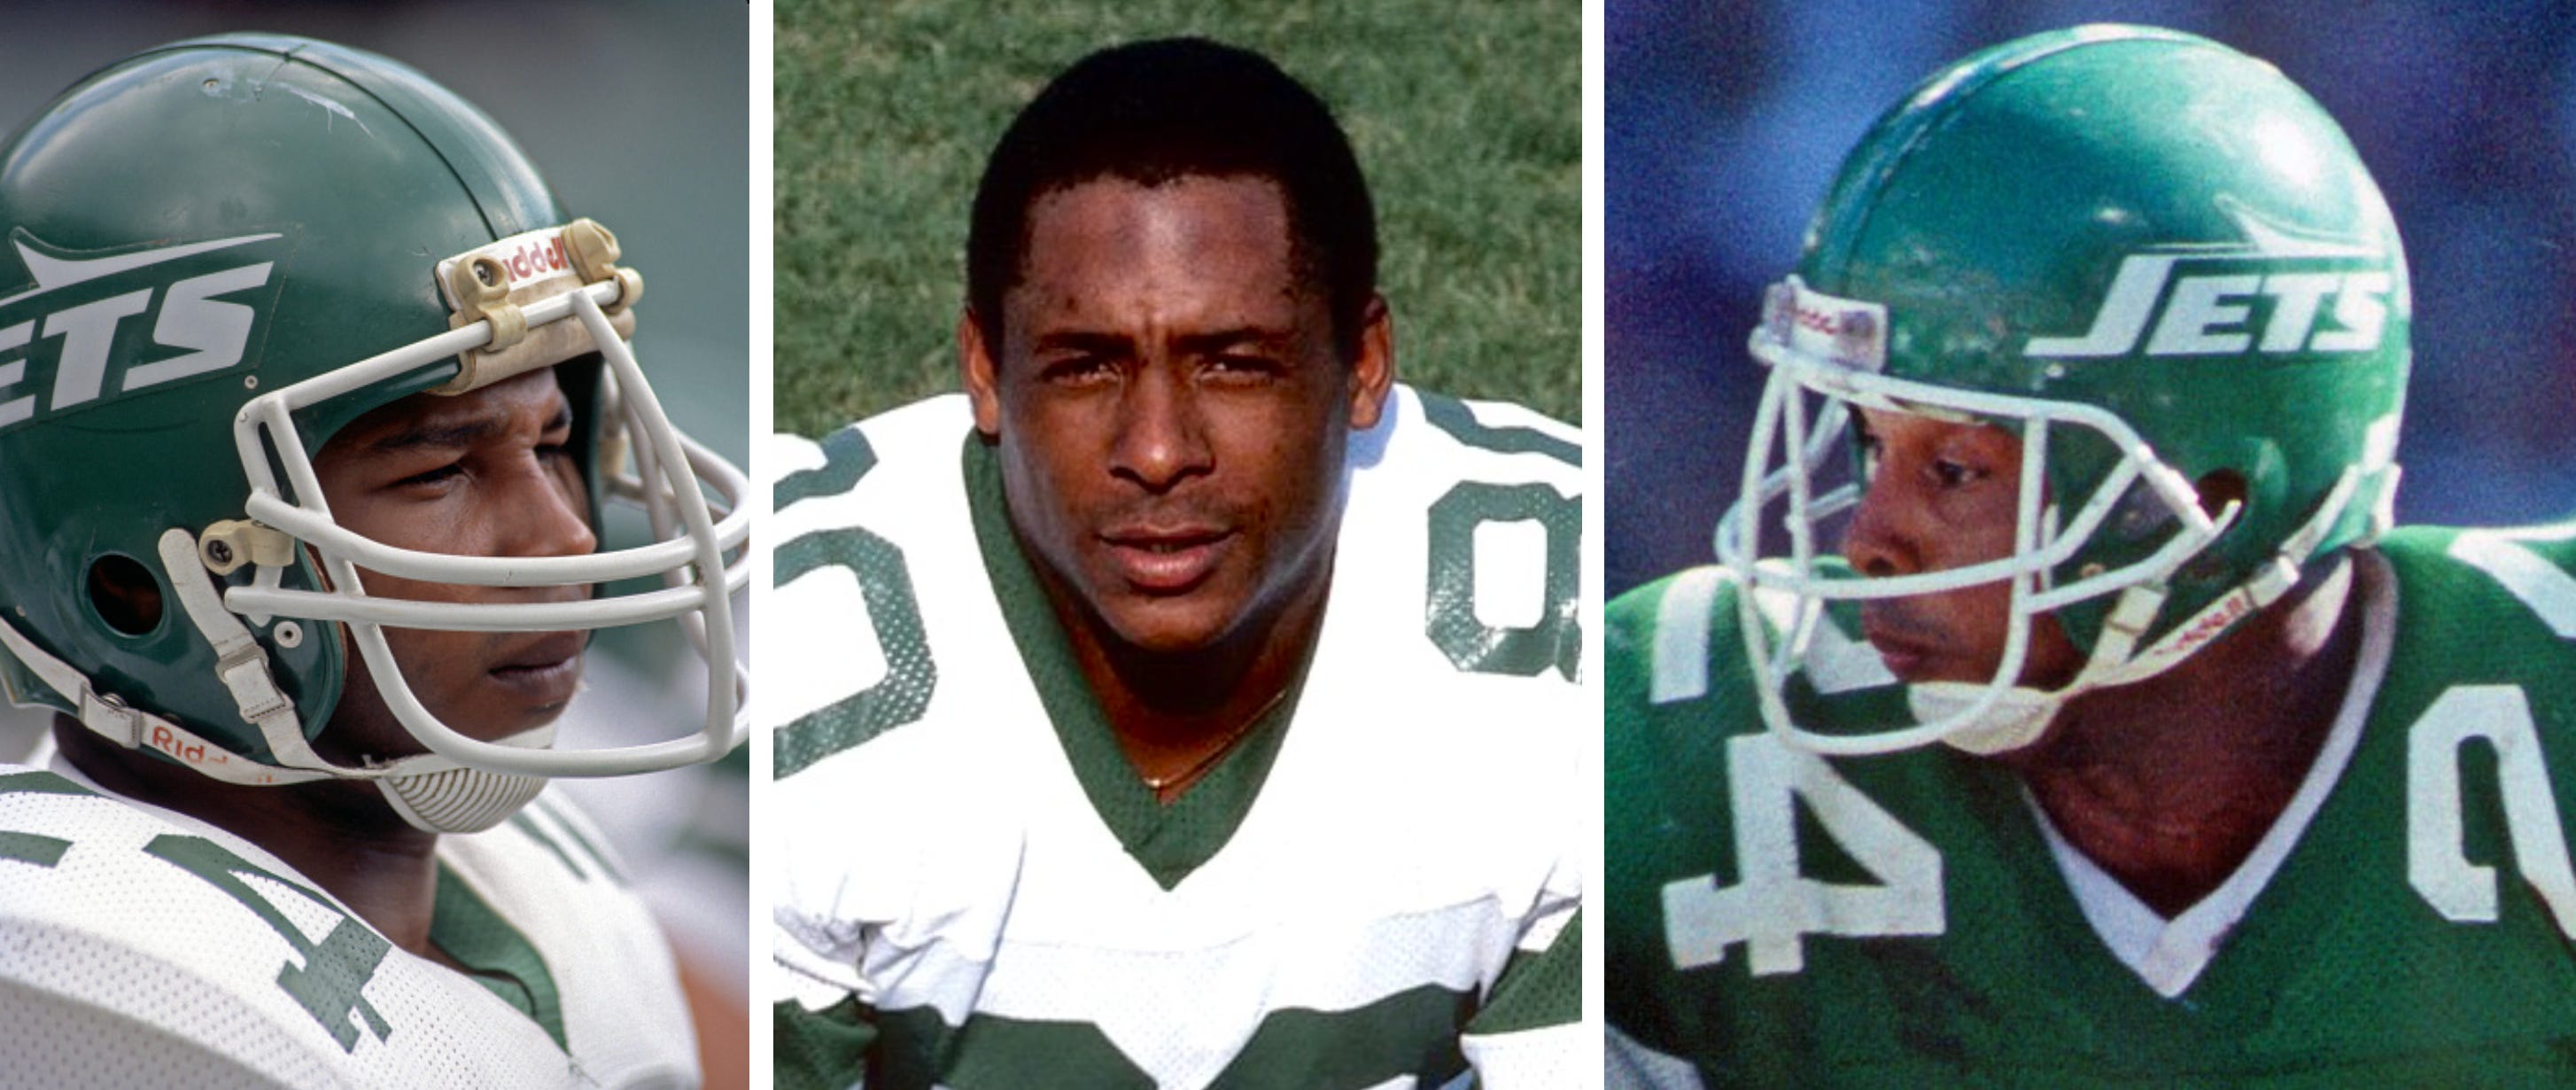 RIP New York Jets uniforms (1998-2018): The 11 best moments